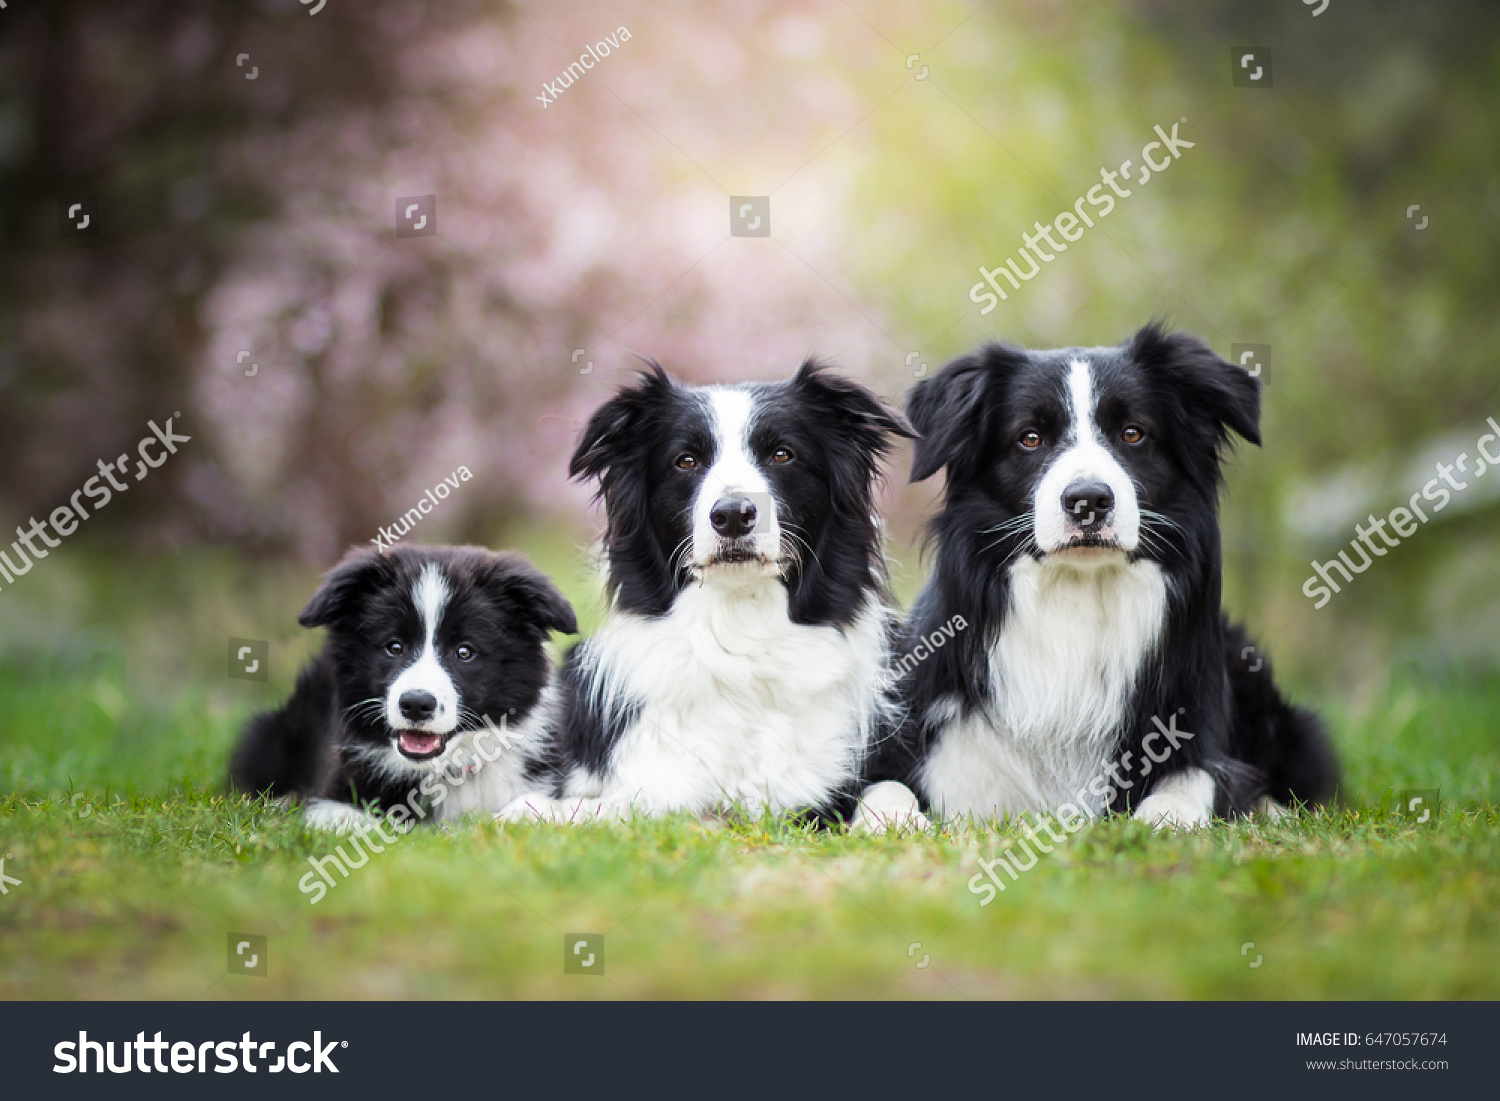 Cute Adorable Black And White Border Collies Family Laying  #647057674